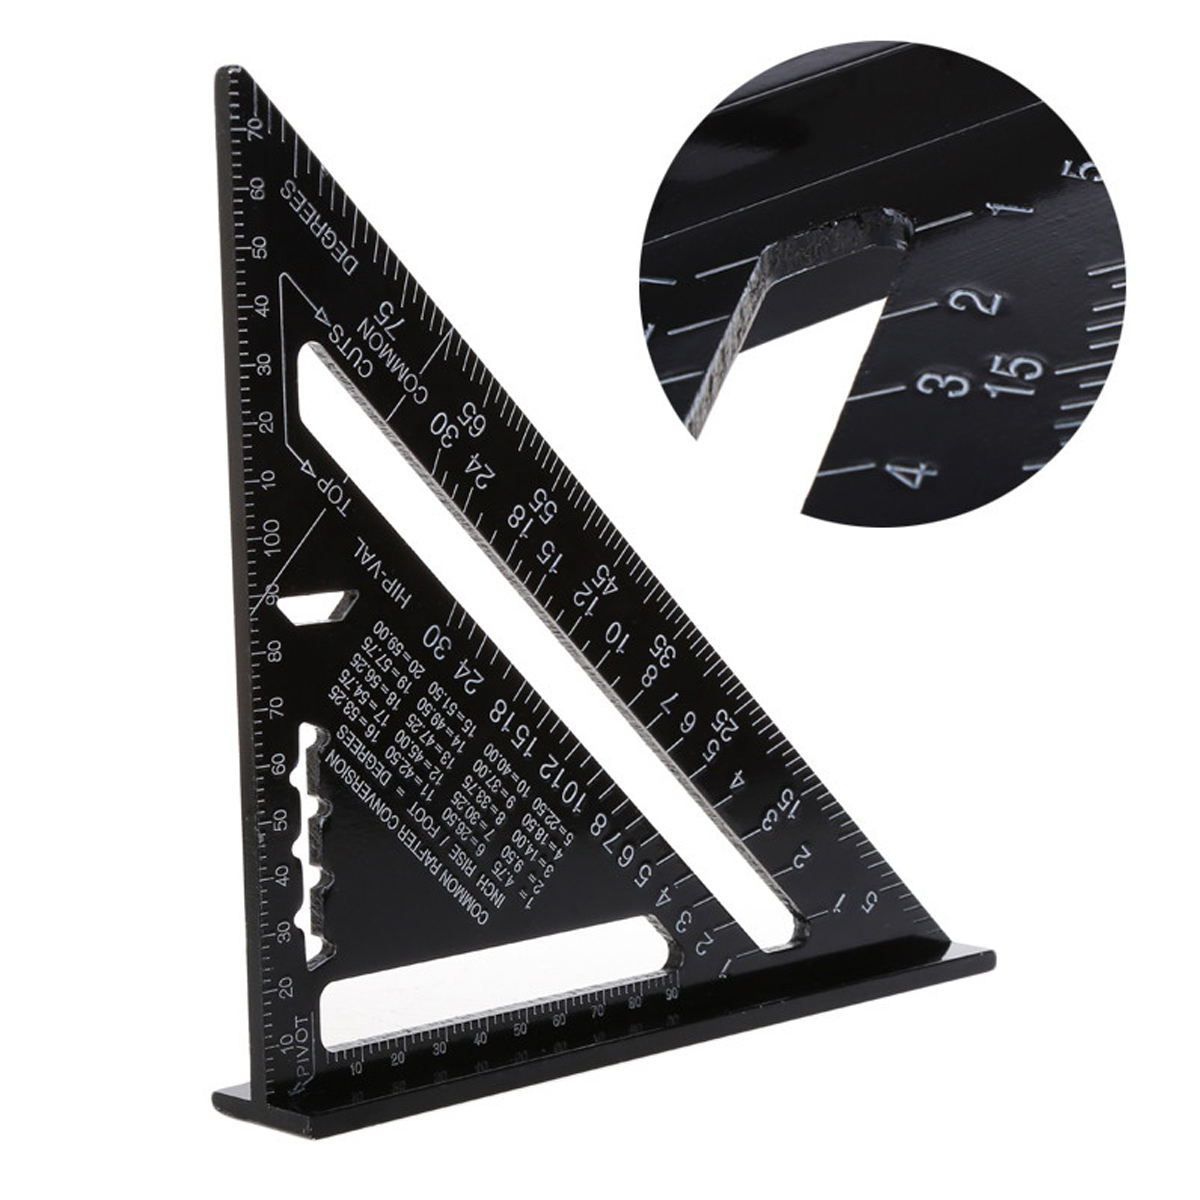 7-Inch-Aluminum-Triangle-Ruler-Square-Rafter-Angle-Miter-Protractor-Measuring-1512916-3